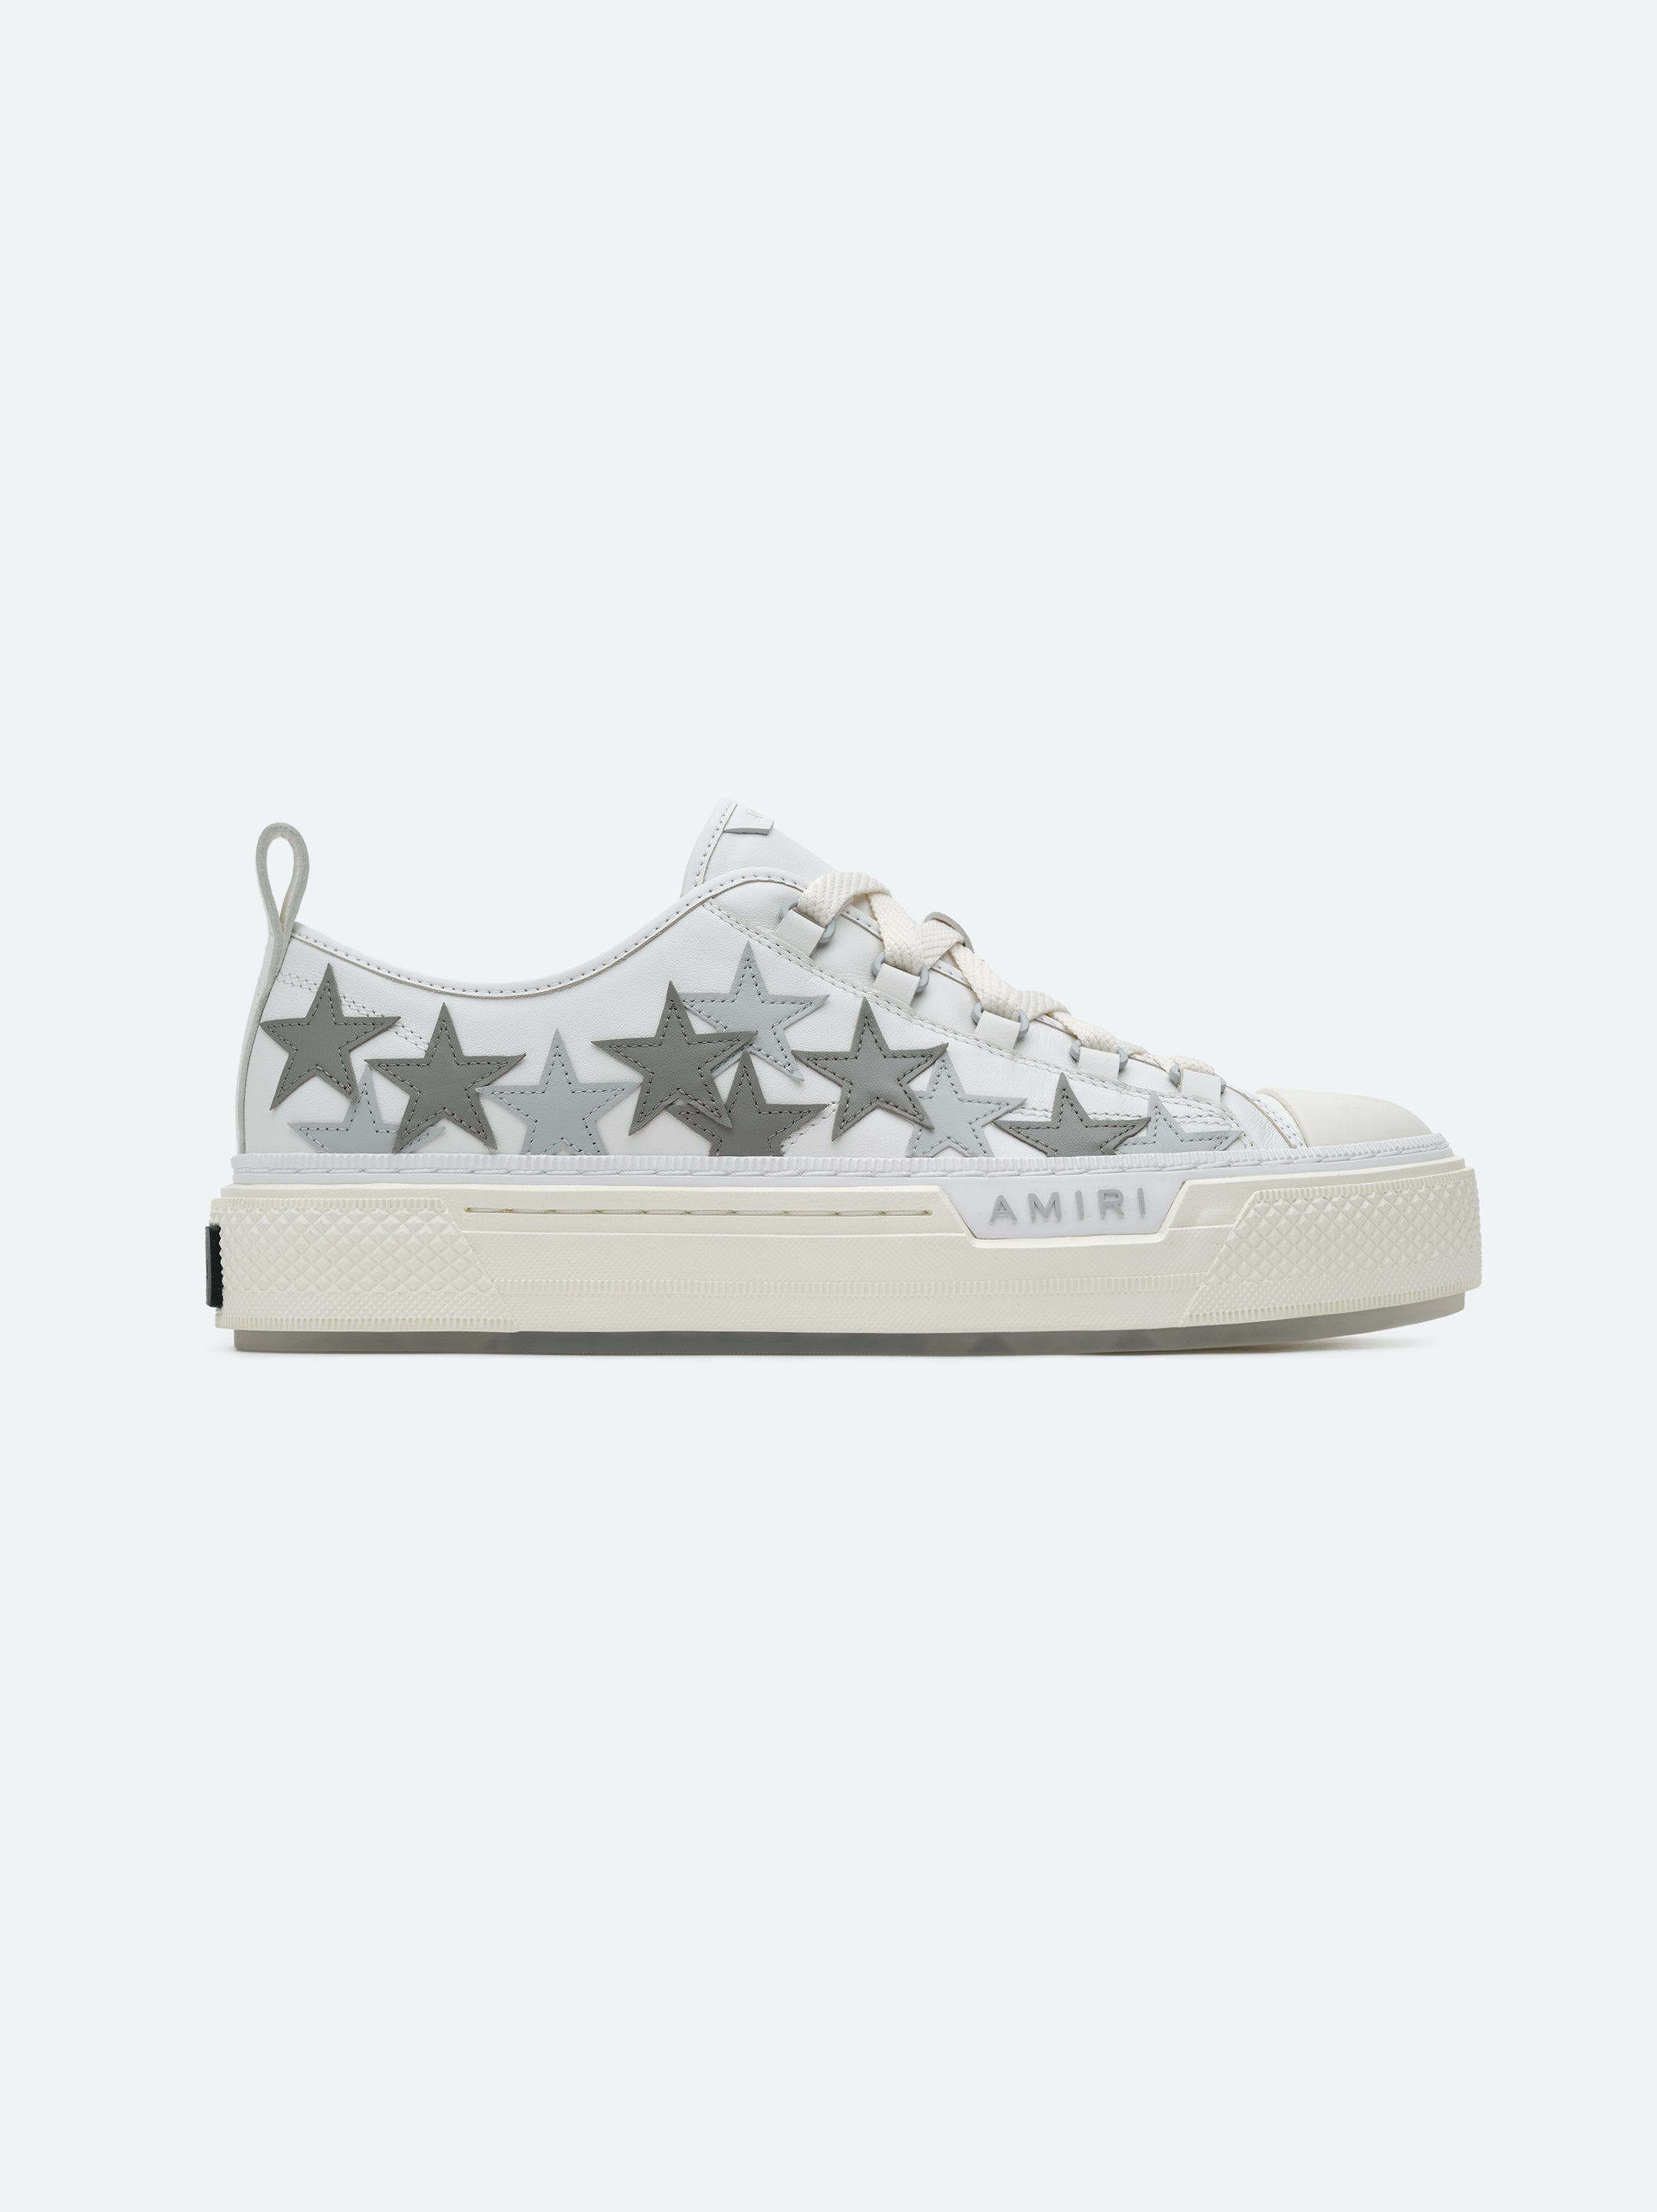 Product STARS COURT LOW - White Grey featured image